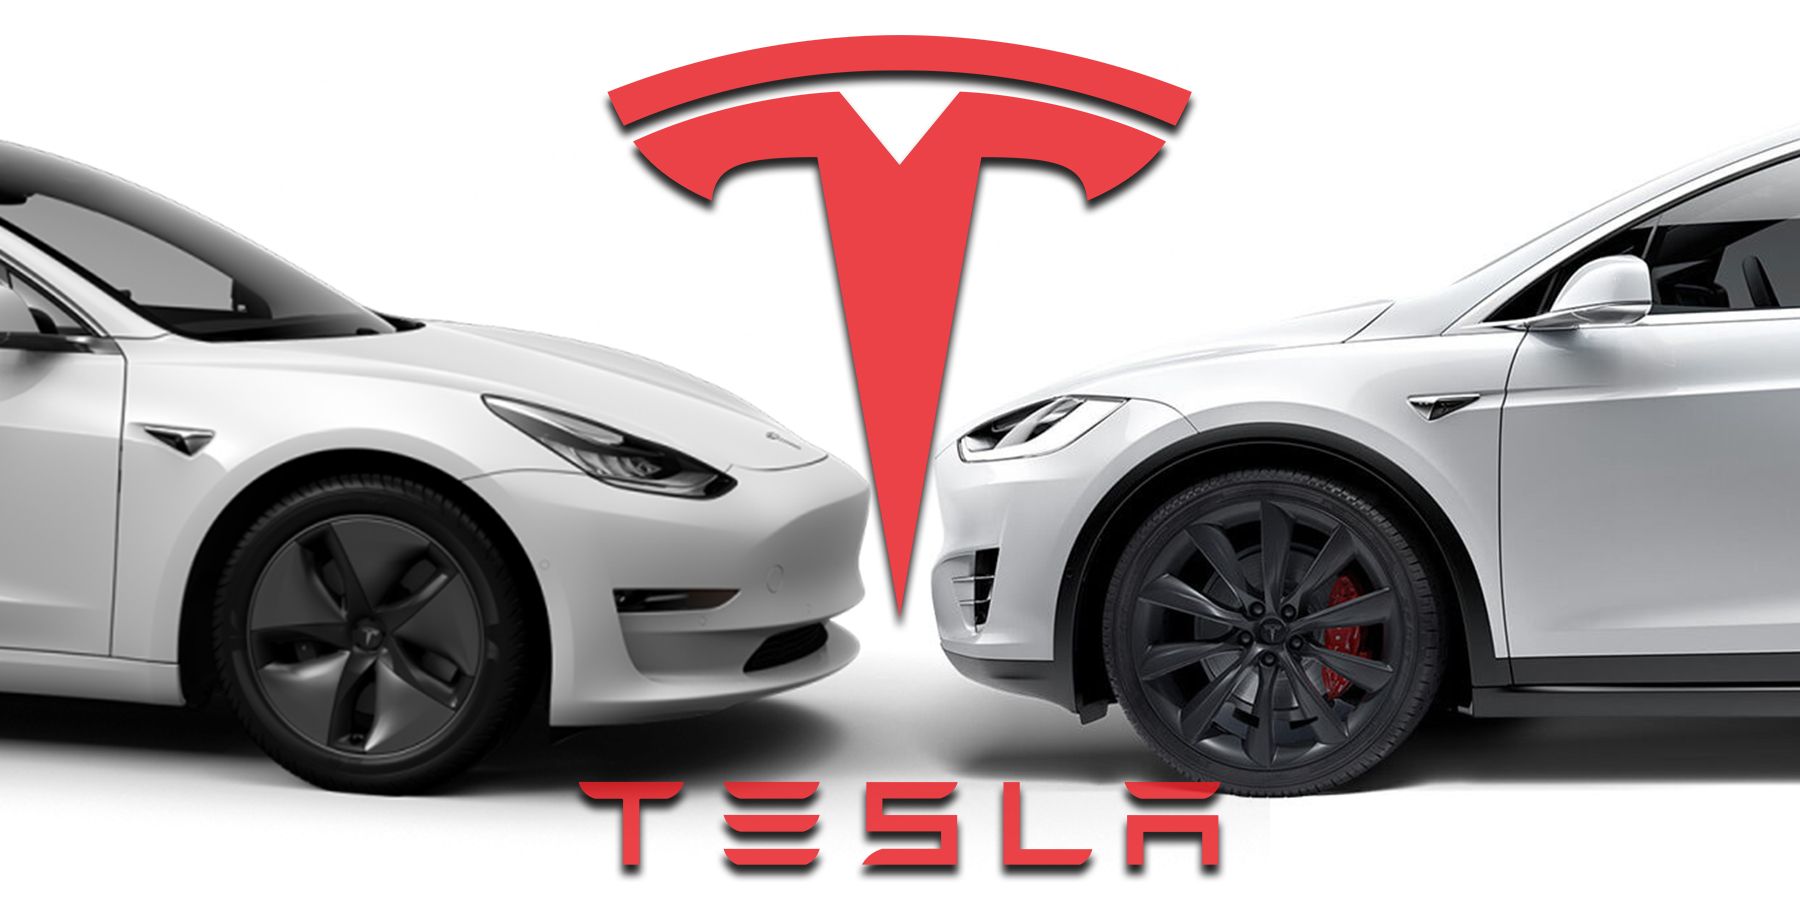 Model 3 Vs Model X Tesla S Cheapest And Most Expensive Evs Compared